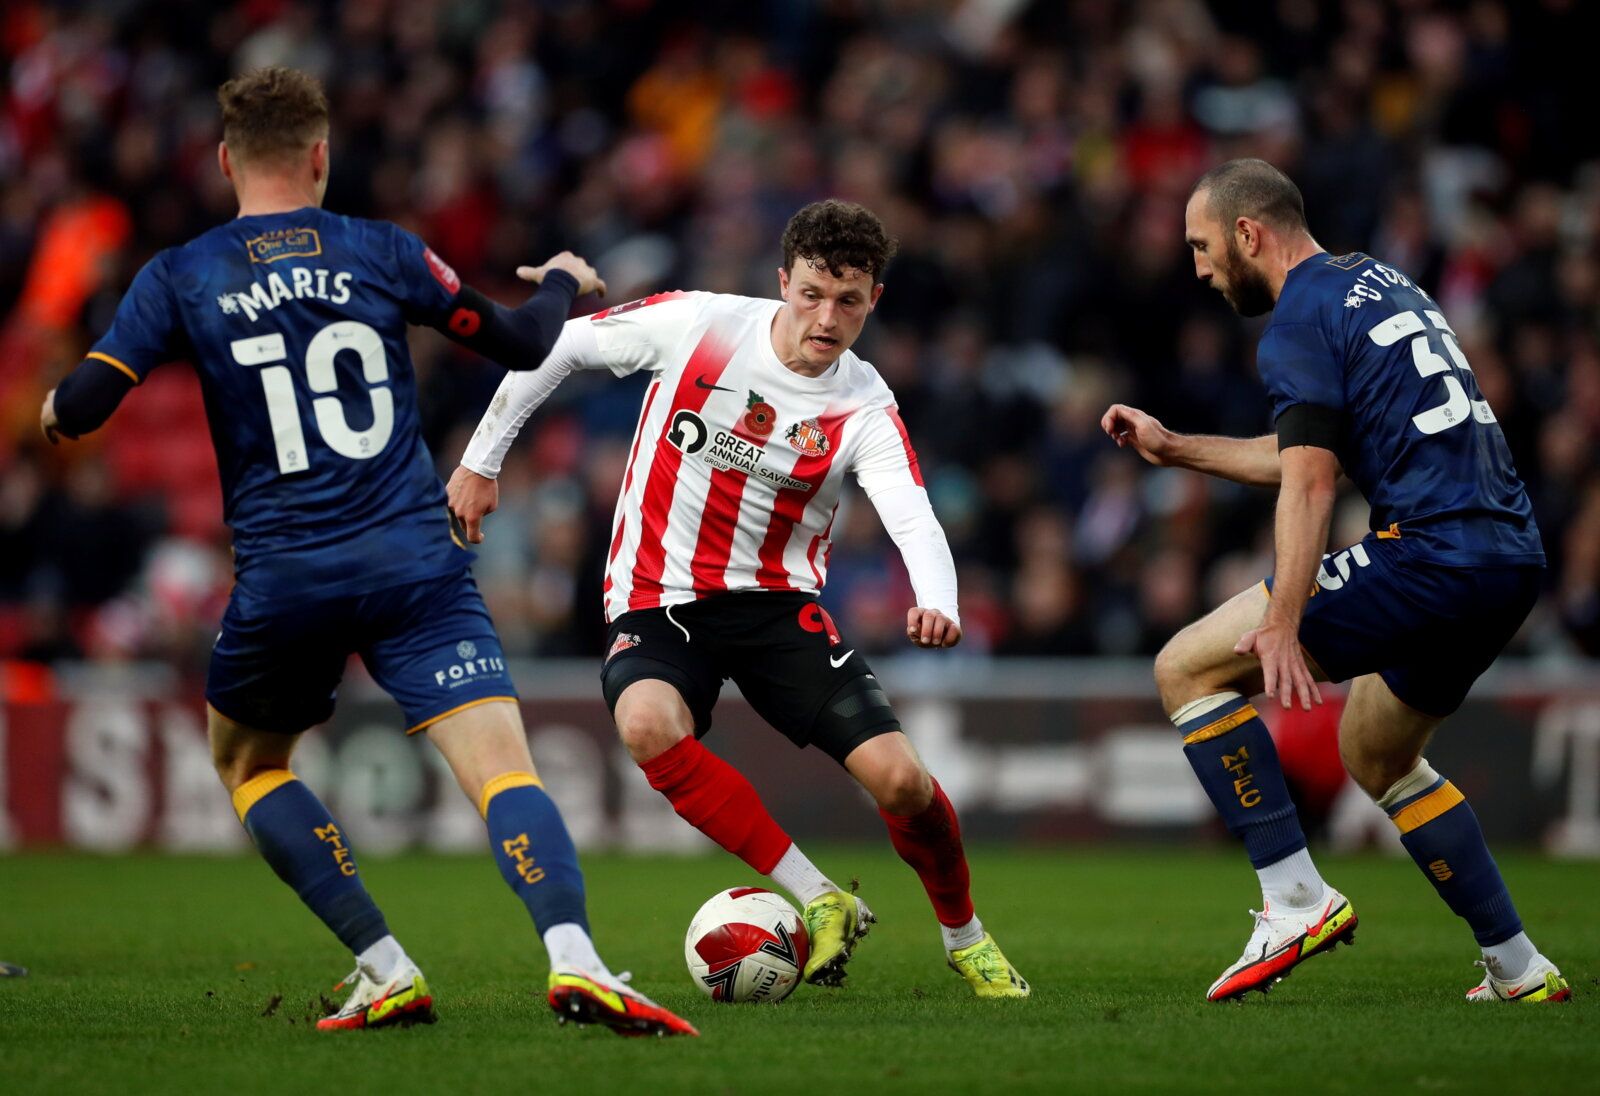 Soccer Football - FA Cup - First Round - Sunderland v Mansfield Town - Stadium of Light, Sunderland, Britain - November 6, 2021 Mansfield Town's George Maris and John Joe Toole in action with Sunderland’s Nathan Broadhead   Action Images/Lee Smith